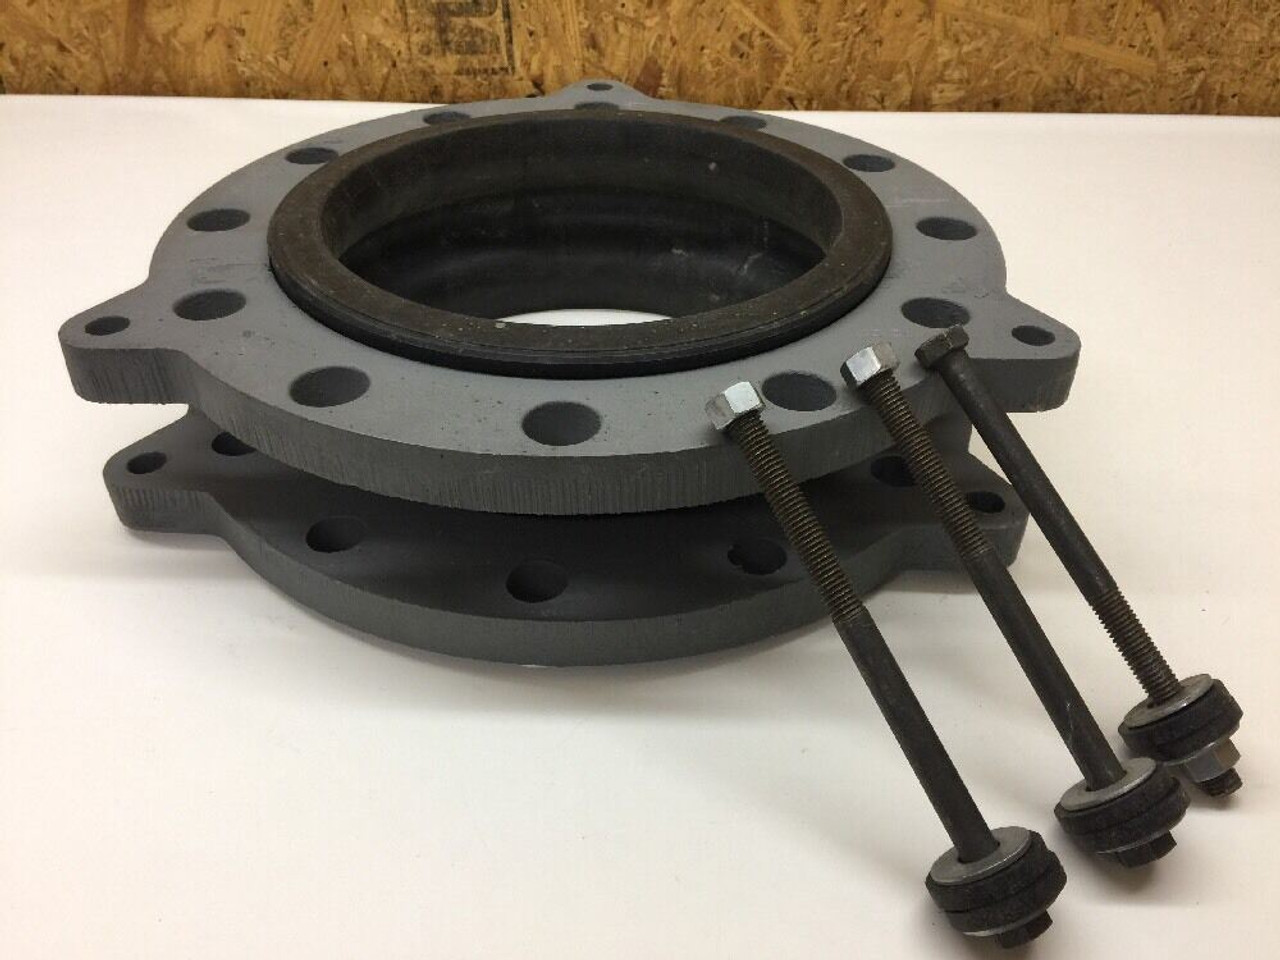 Garflex Expansion Joint Connector 98100-1020 Garlock 10" Pipe 5" Length 